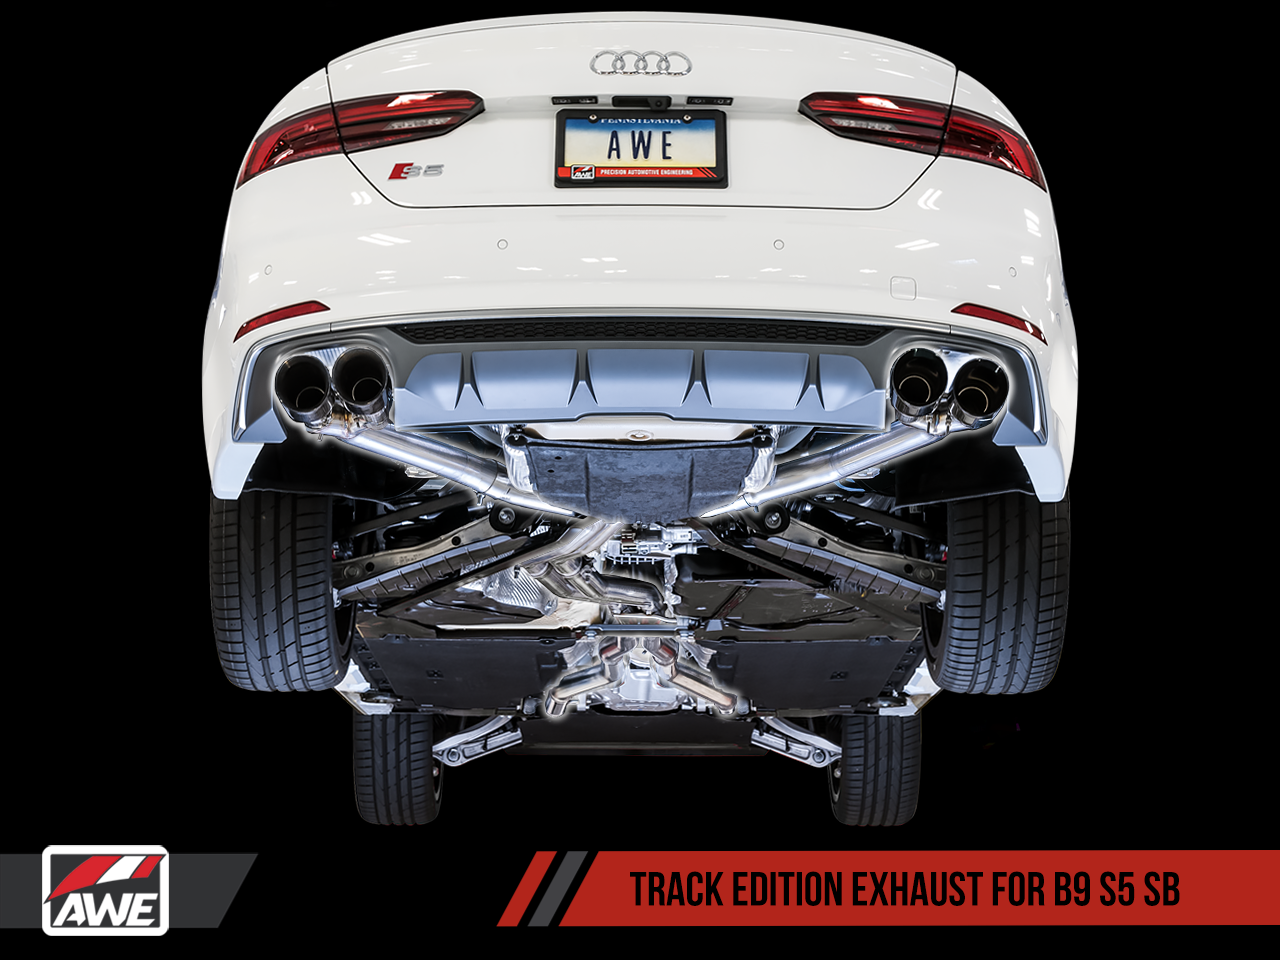 AWE Touring Edition Exhaust for B9 S5 Sportback - Resonated for Performance Catalyst - Motorsports LA